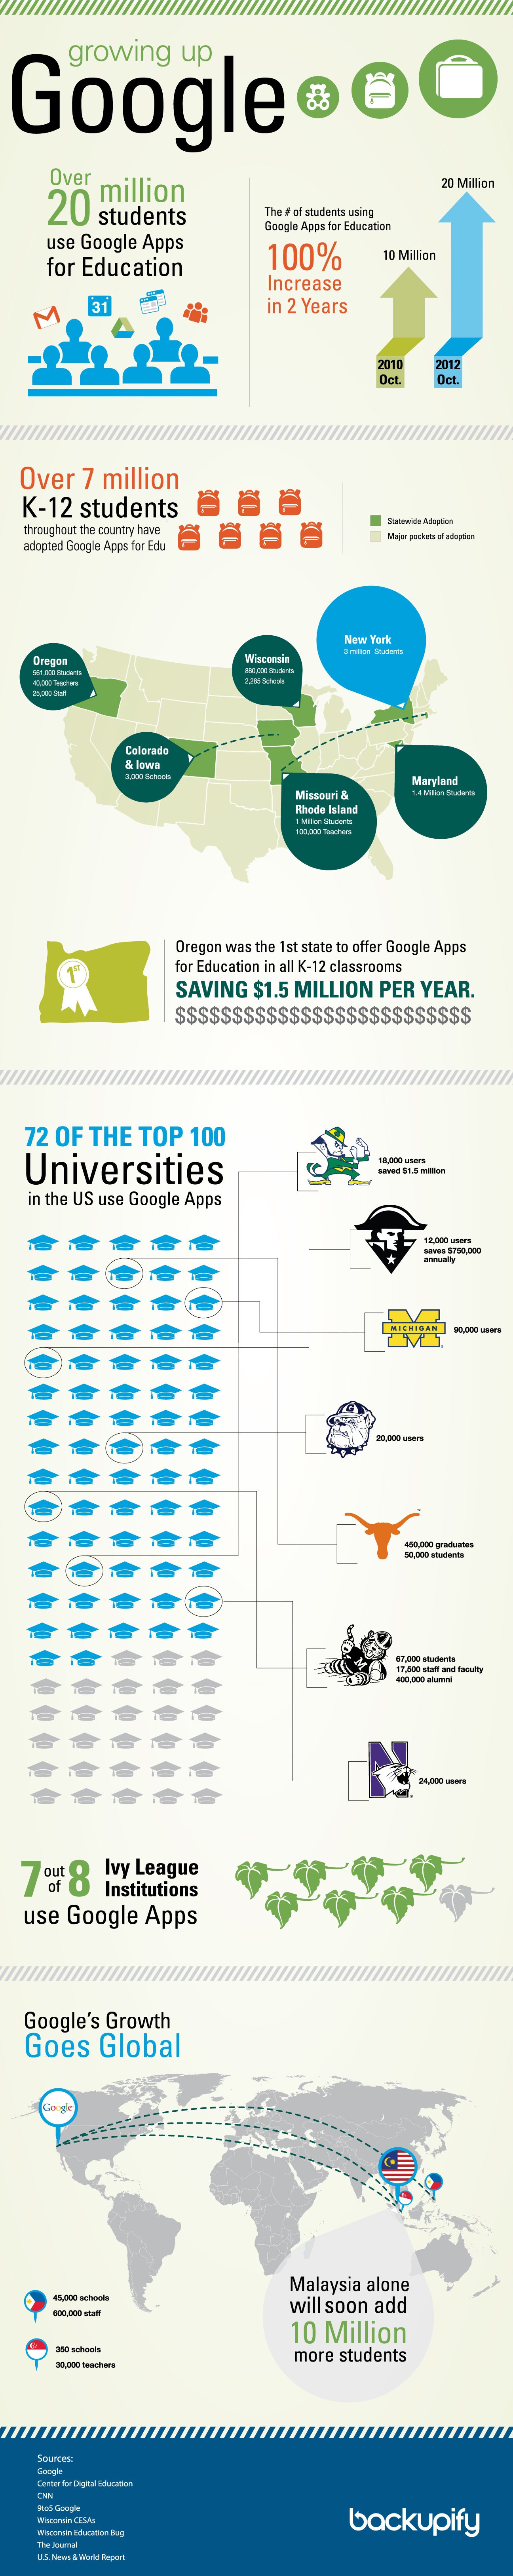 The Growth of Google Apps for Education Infographic